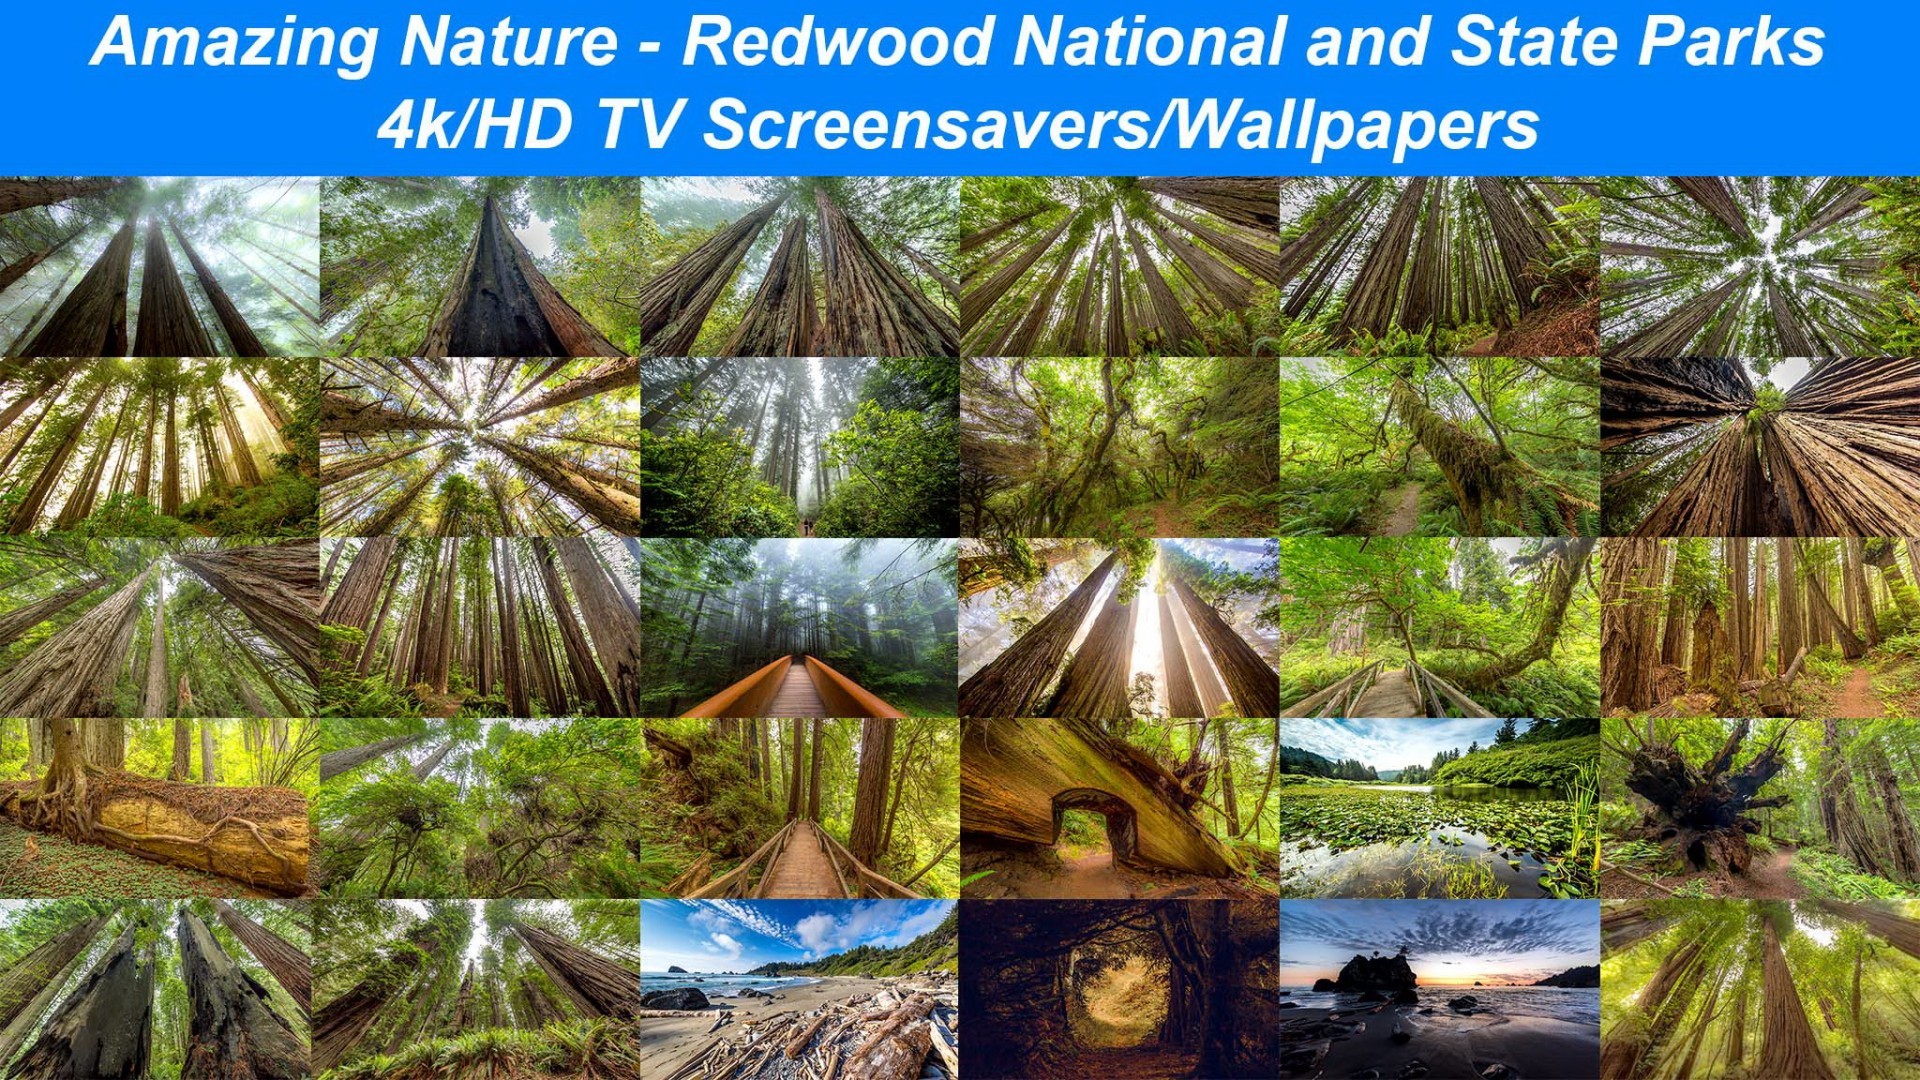 1920x1080 Amazing Nature: Redwood National and State Parks 1 – 4K/HD Screensavers/ Wallpapers